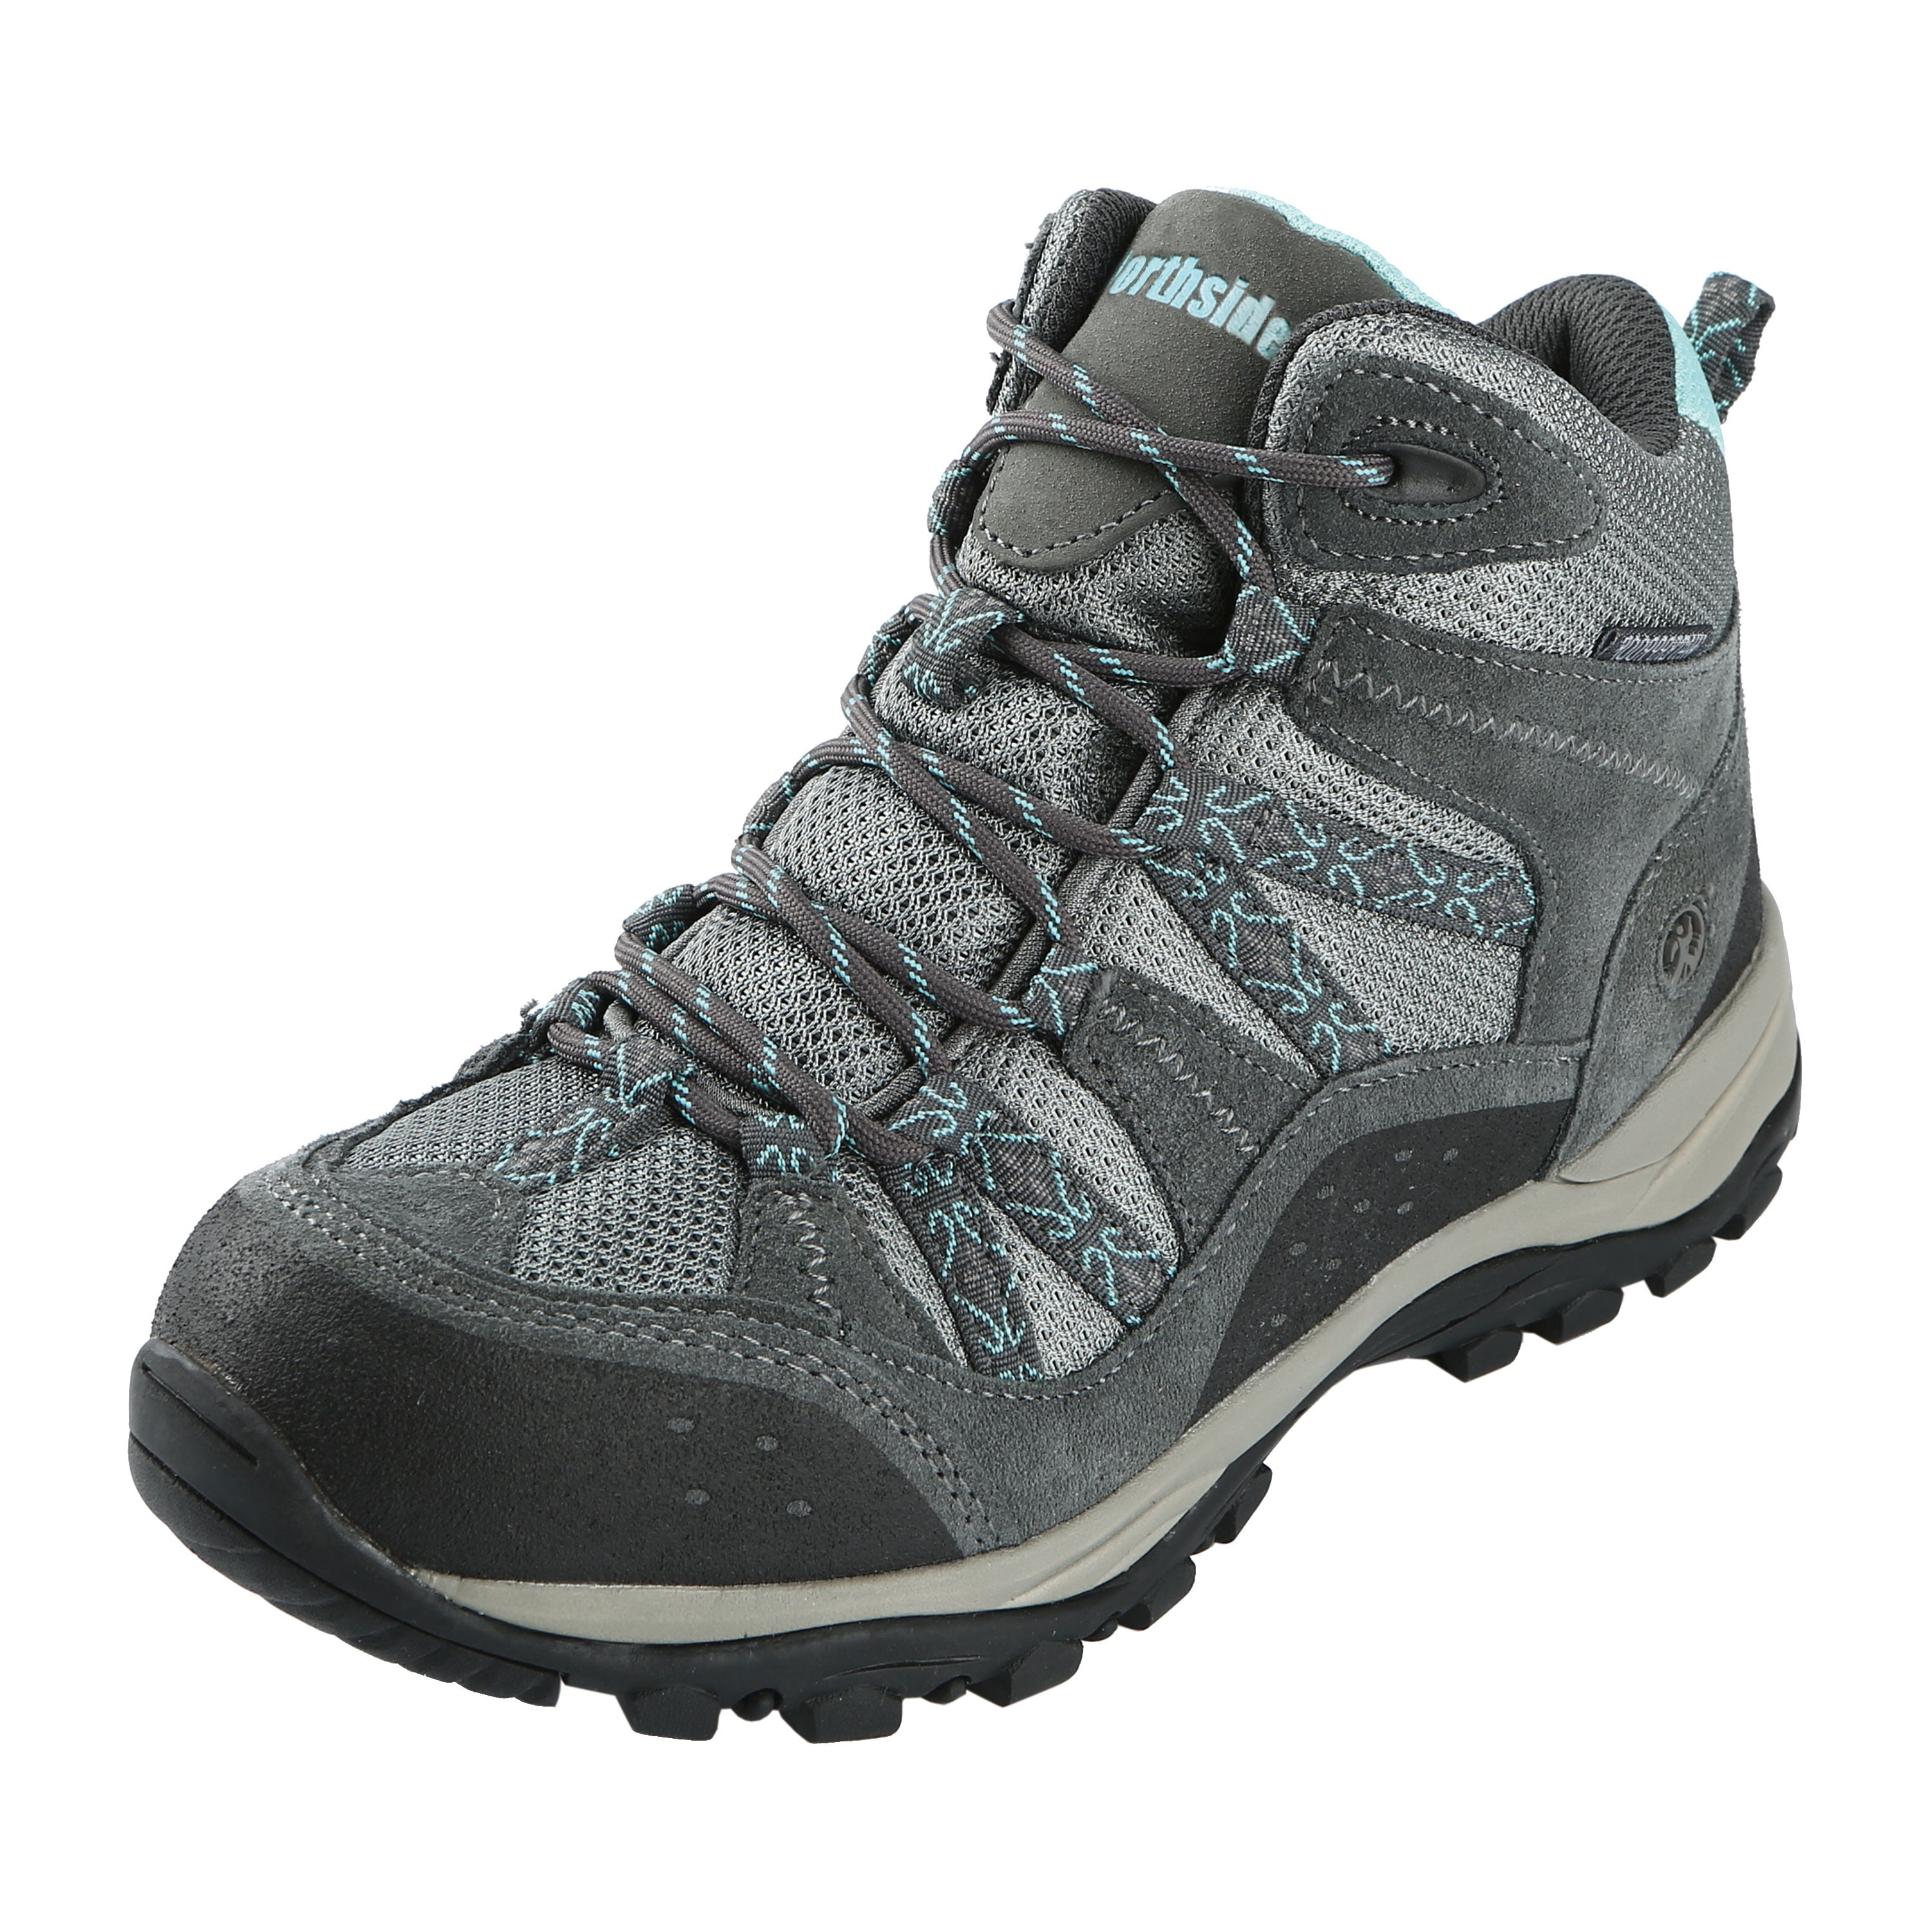 Northside Women's Apex Lite Waterproof Leather Hiking Boots NEW Hiker Shoes 